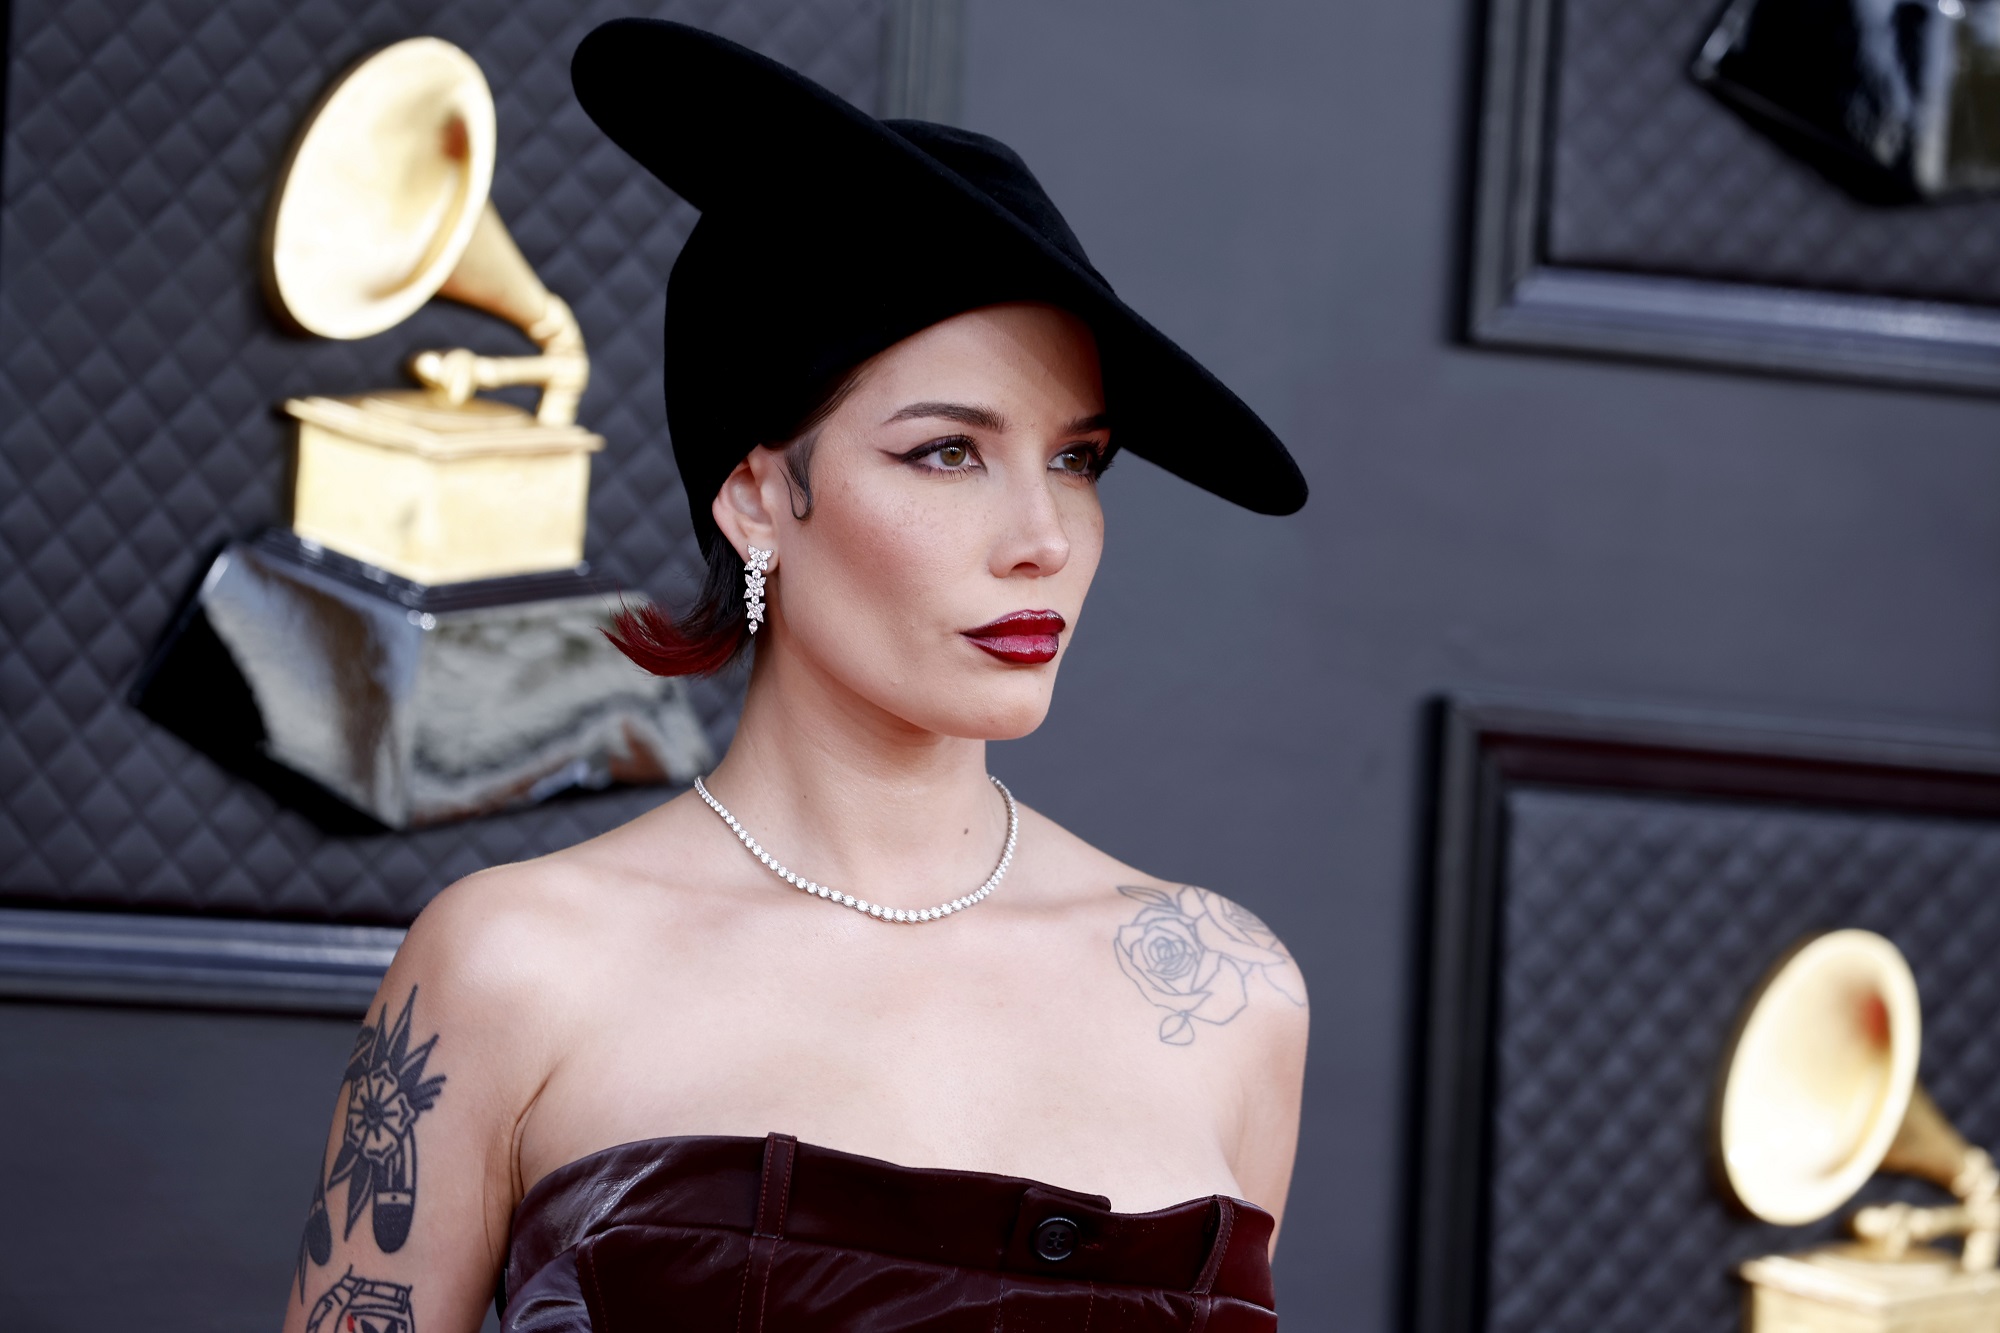 Halsey’s Label Confirms the Singer’s Song ‘So Good’ Will Be Released in June